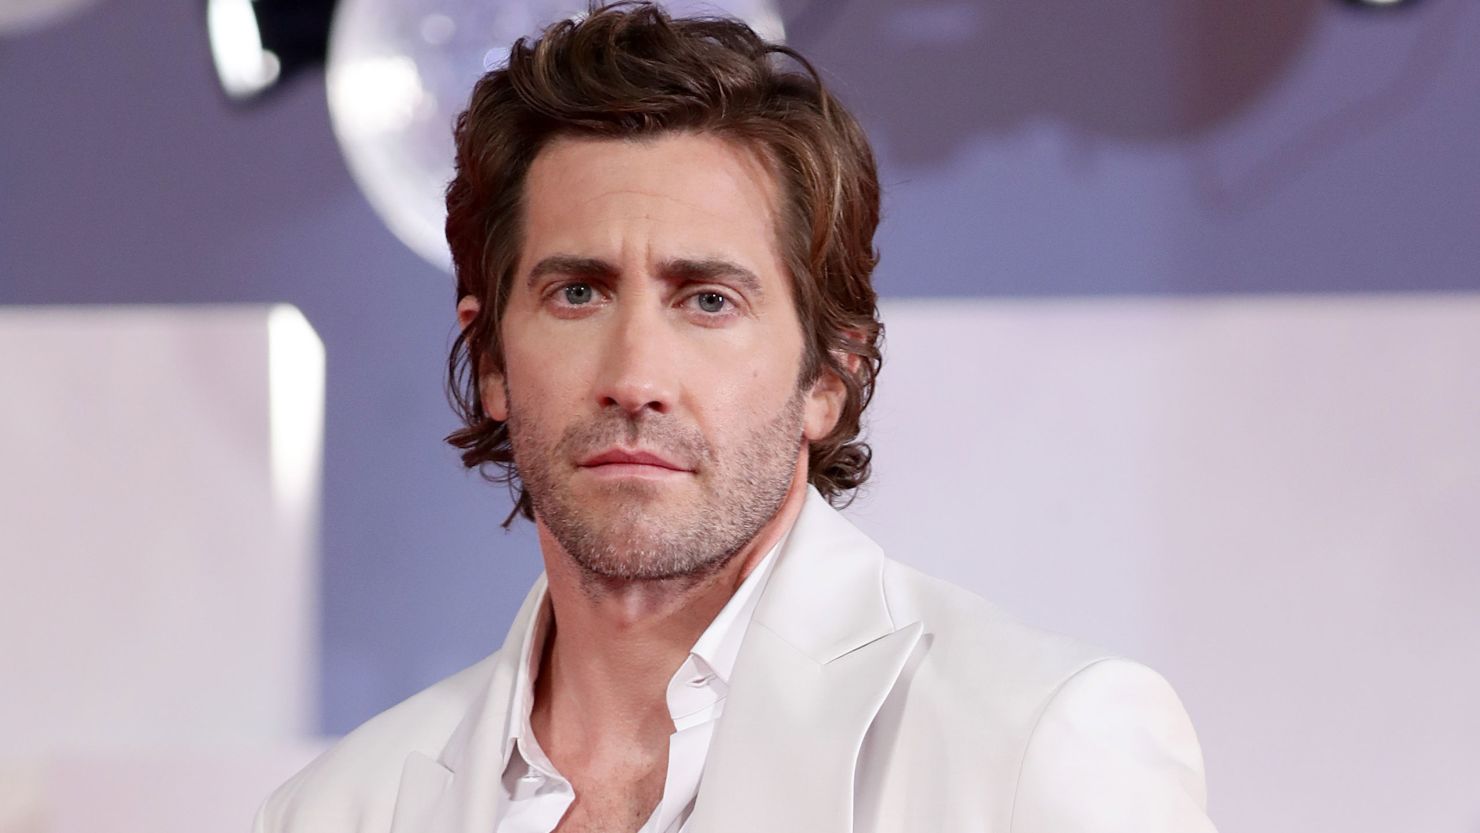 Jake Gyllenhaal, here during the Venice International Film Festival on in September, opened up about his life at 41 in a new interview with Esquire.